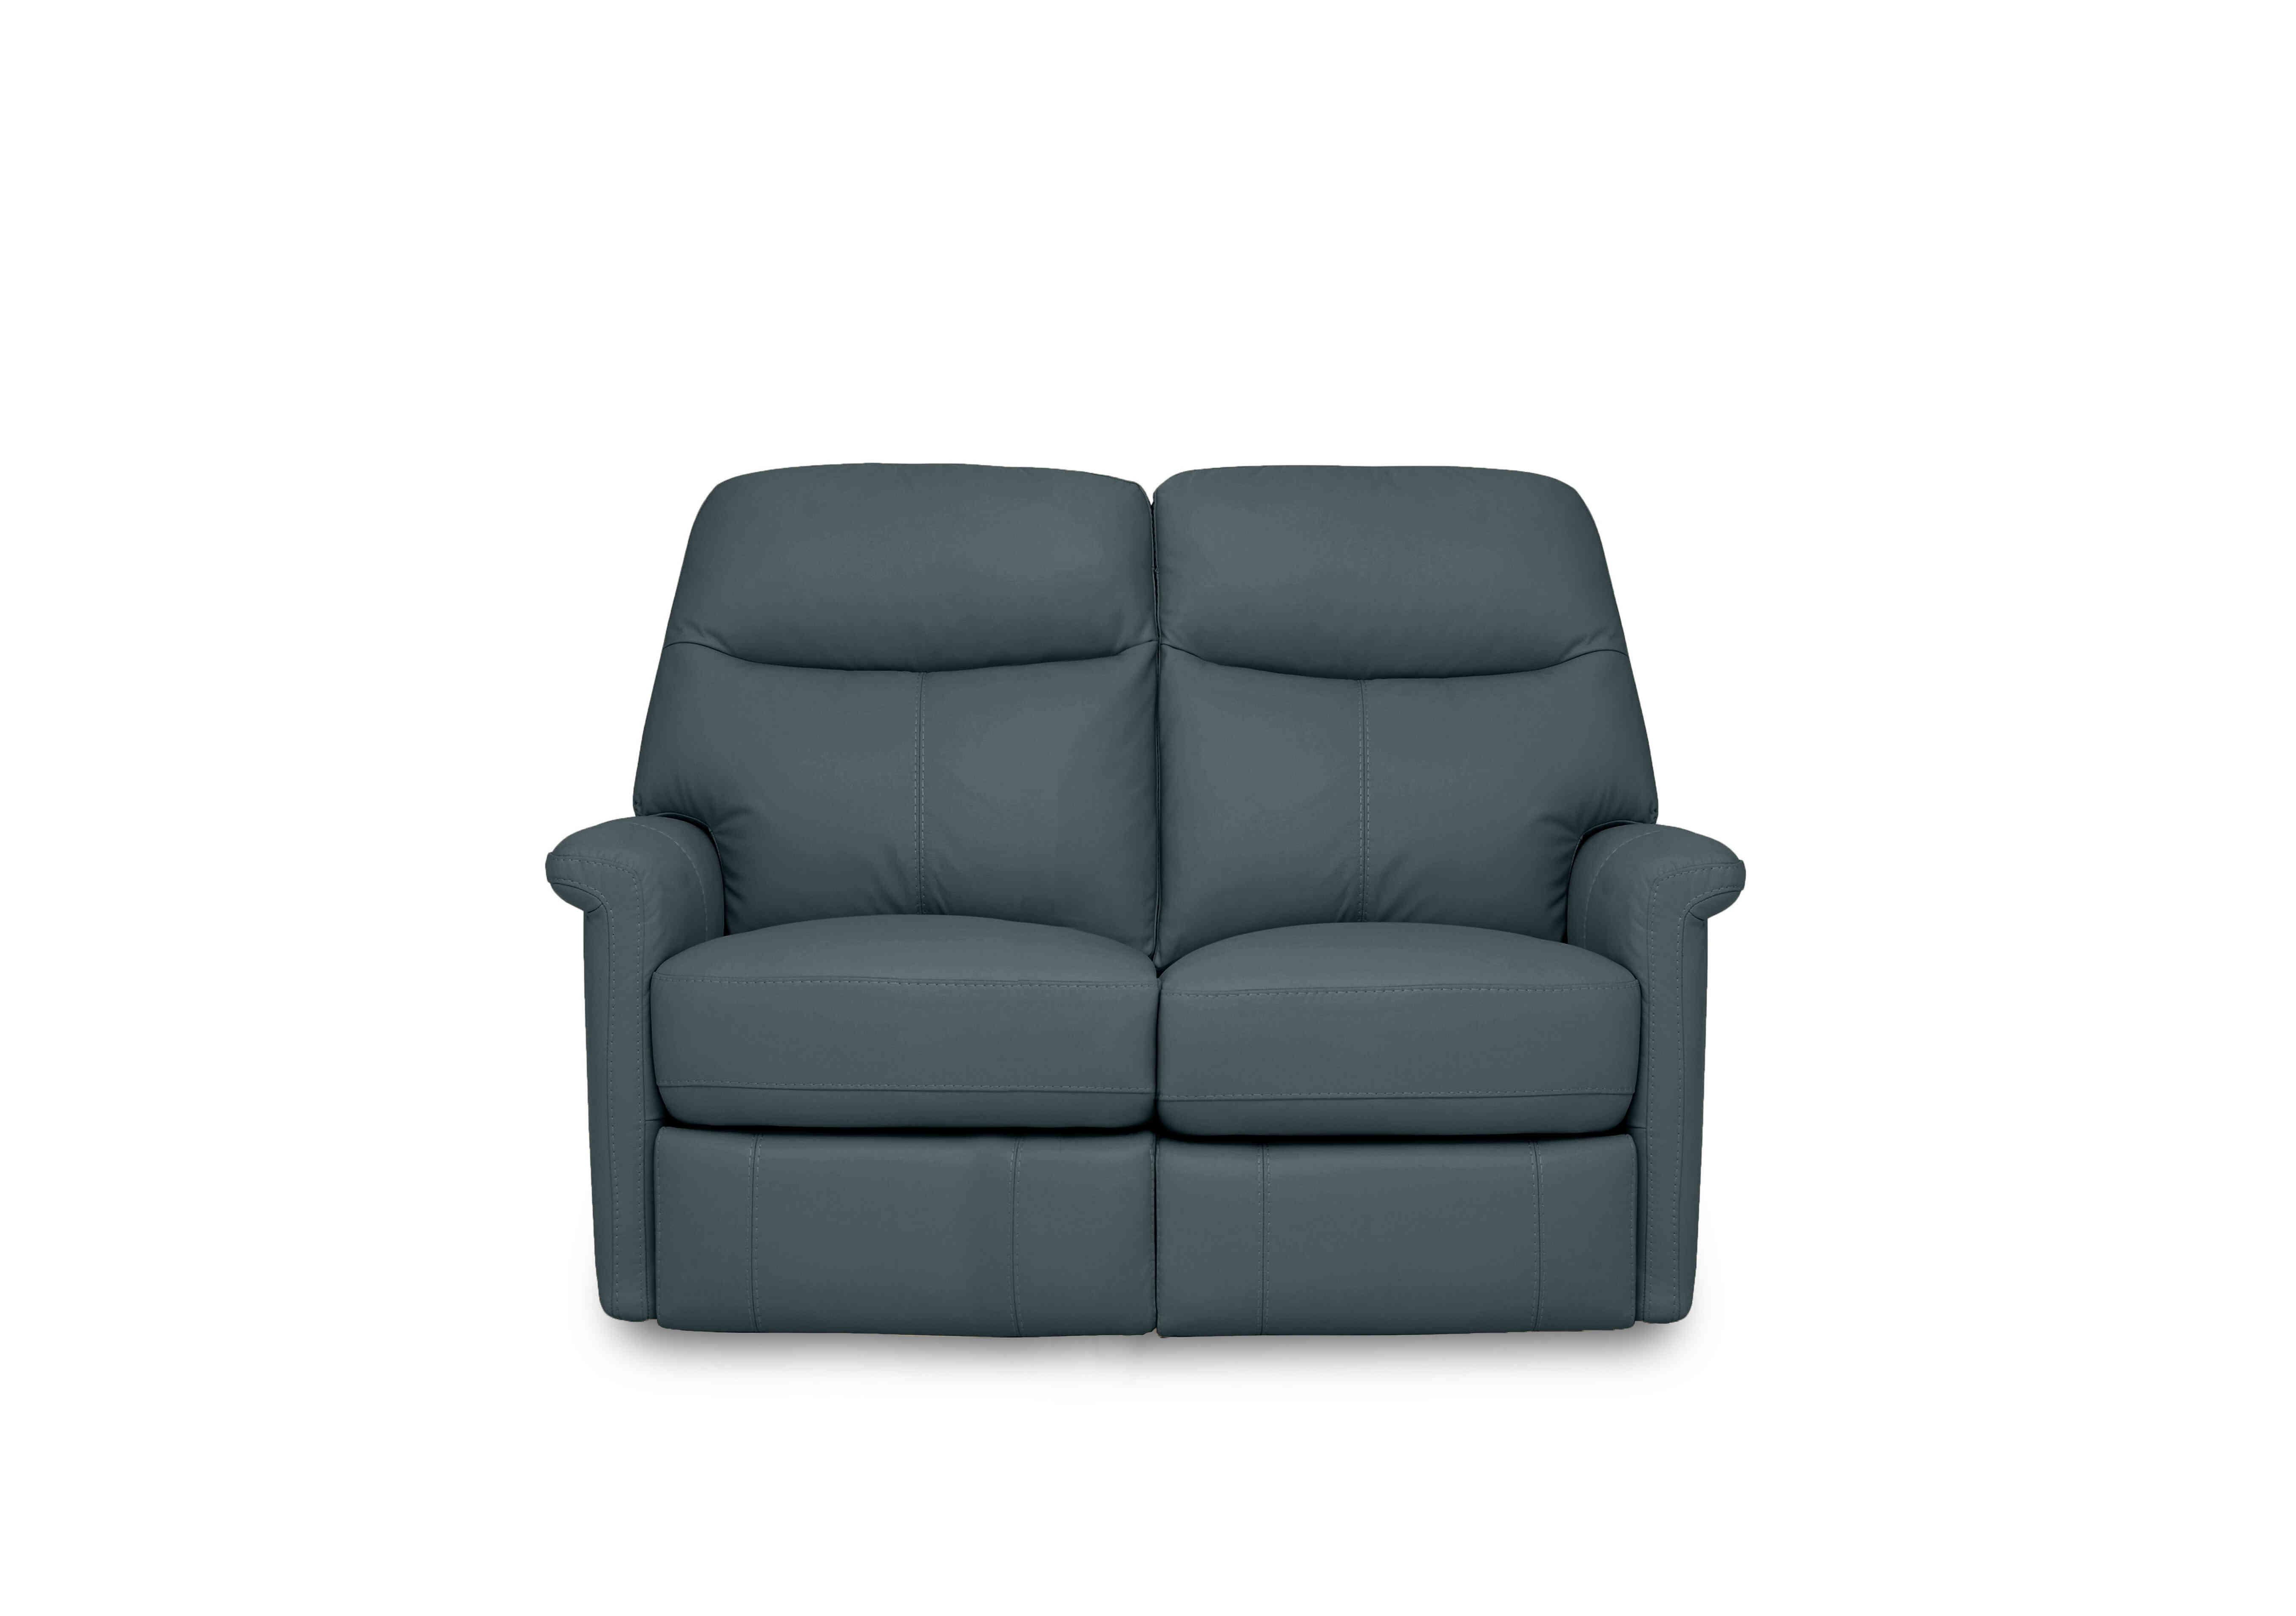 Compact Collection Lille 2 Seater Leather Sofa in Bv-301e Lake Green on Furniture Village